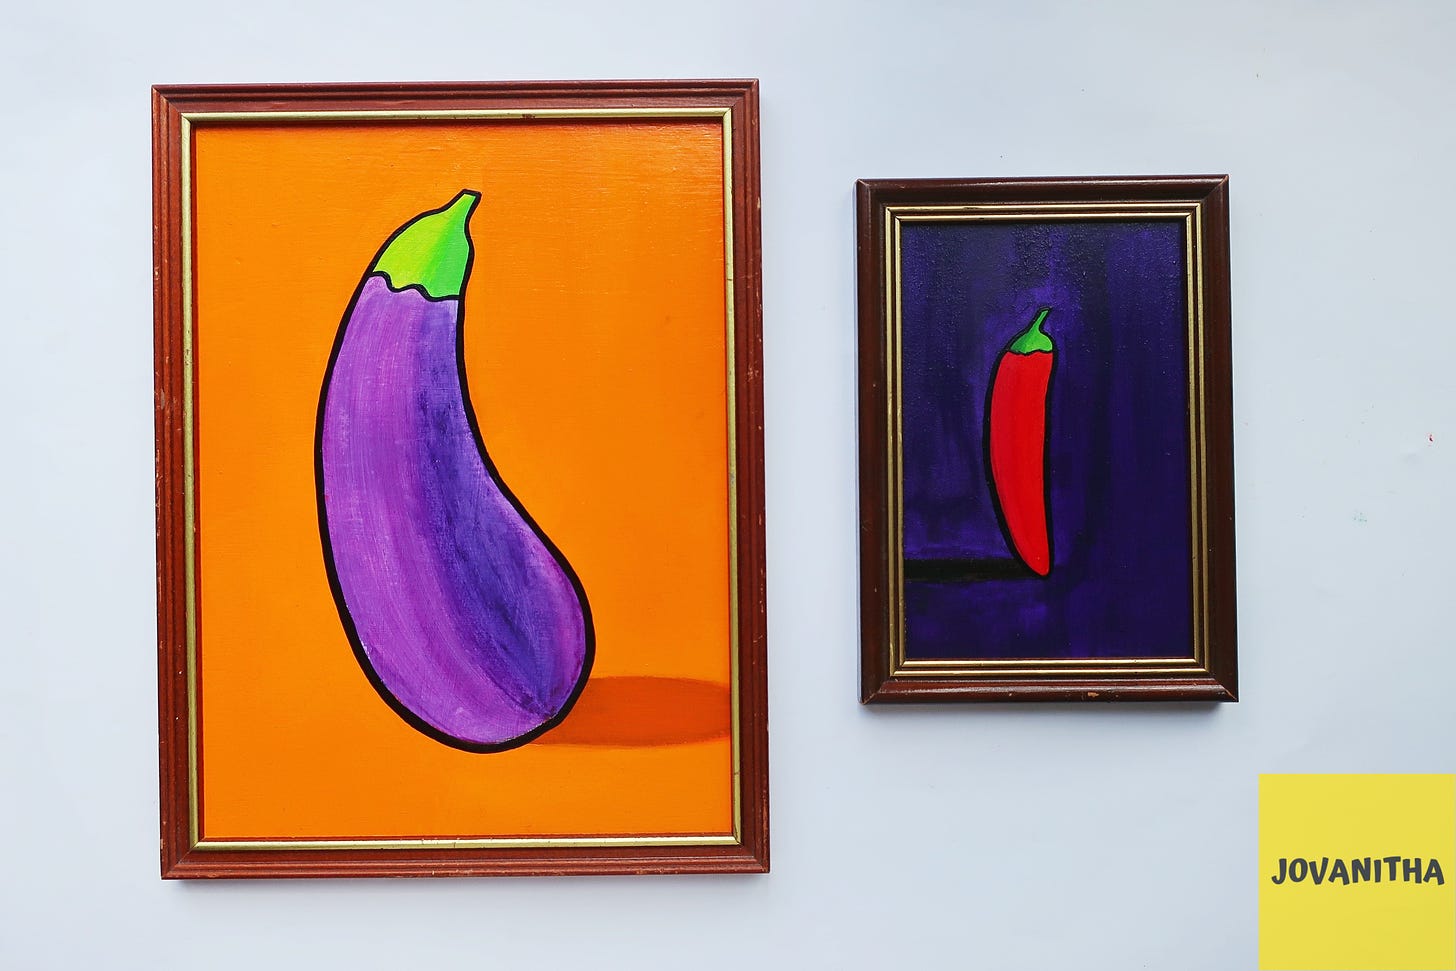 A purple eggplant on an orange background and a red chili on a purple background in vintage frames